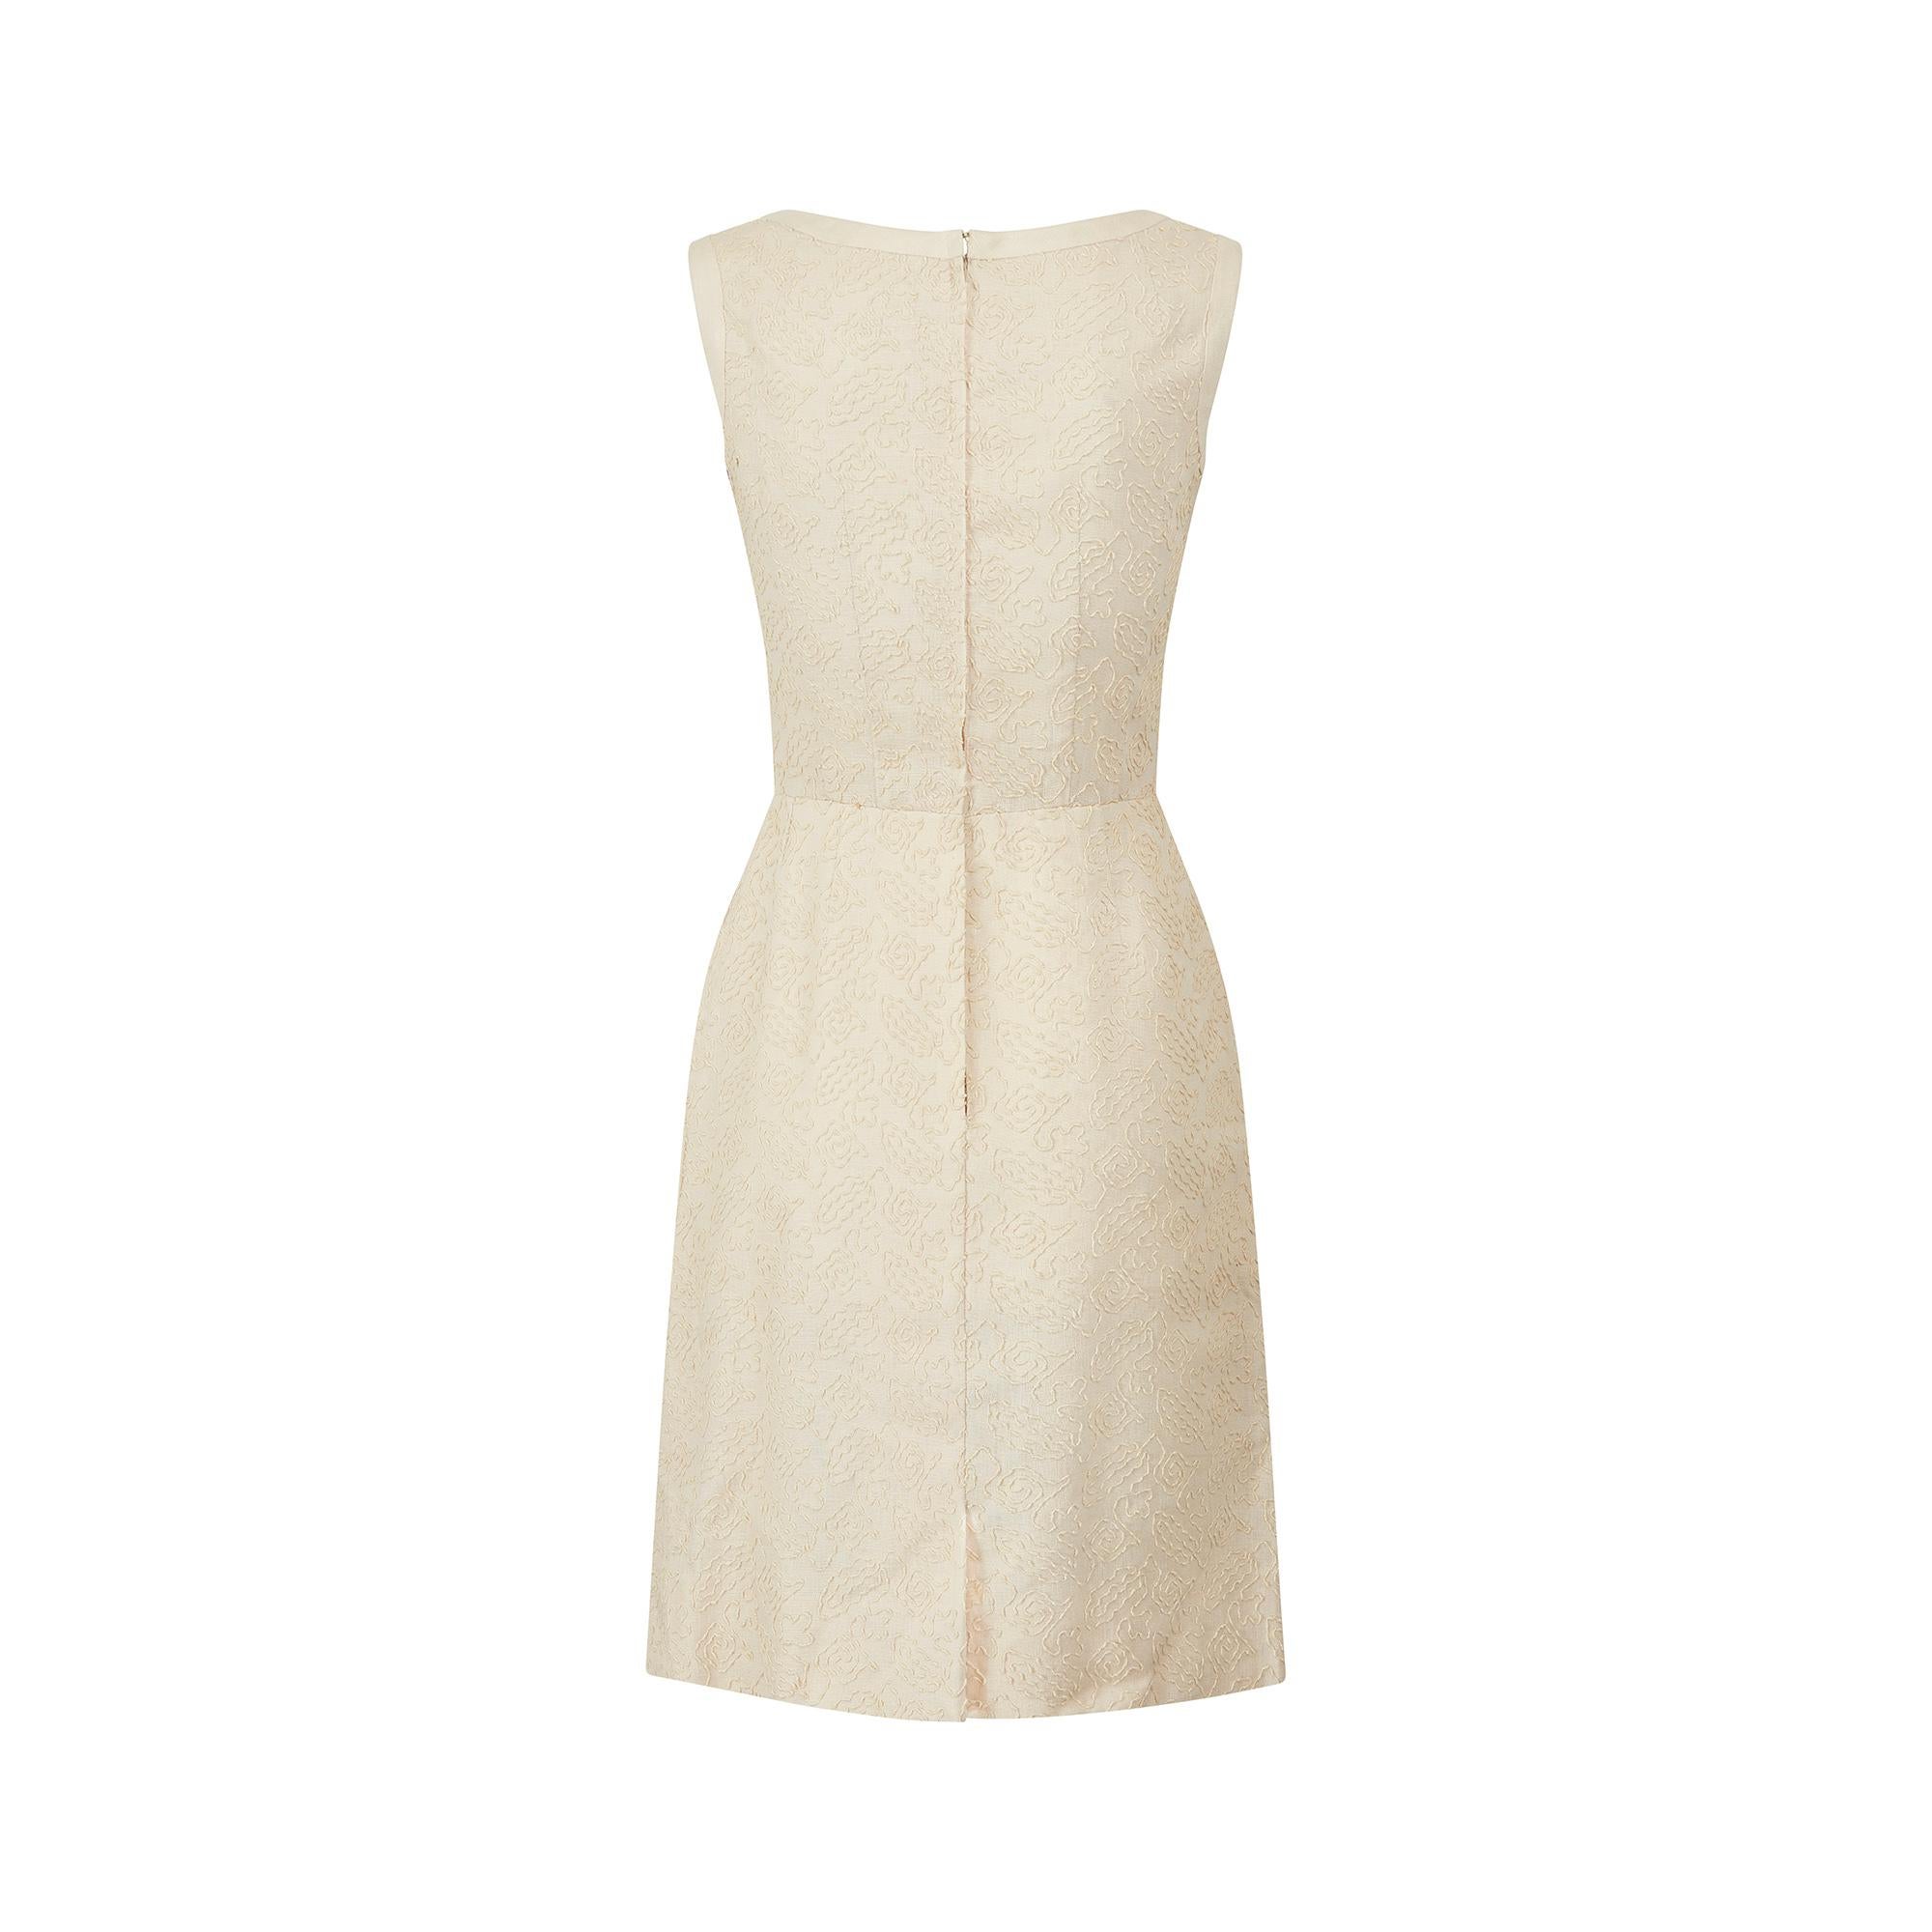 1960s Oatmeal Linen Textured Linen Dress In Excellent Condition For Sale In London, GB